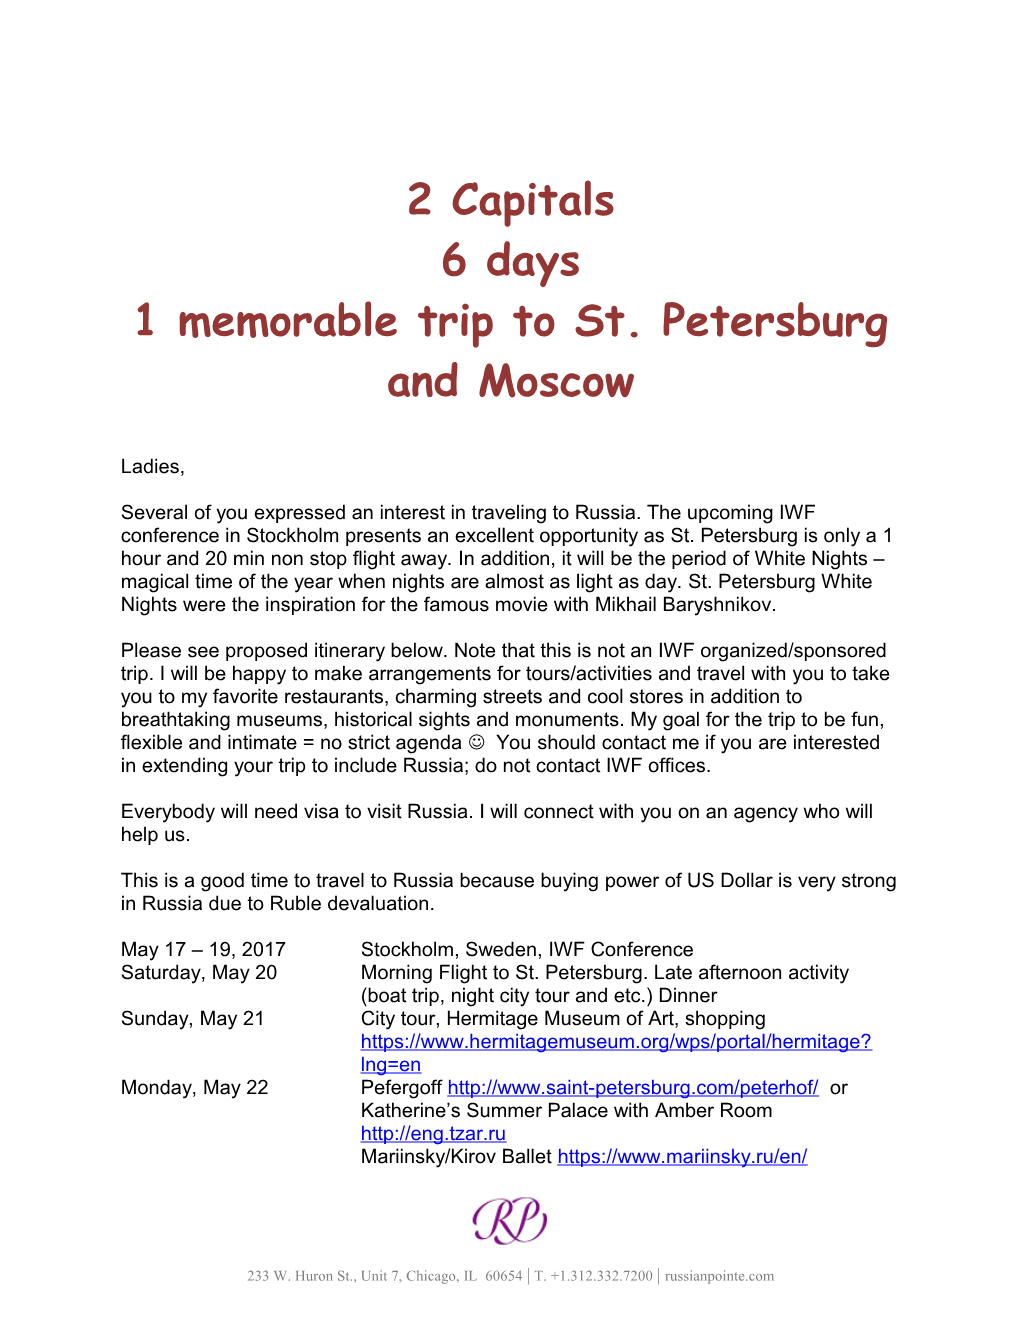 1 Memorable Trip to St. Petersburg and Moscow